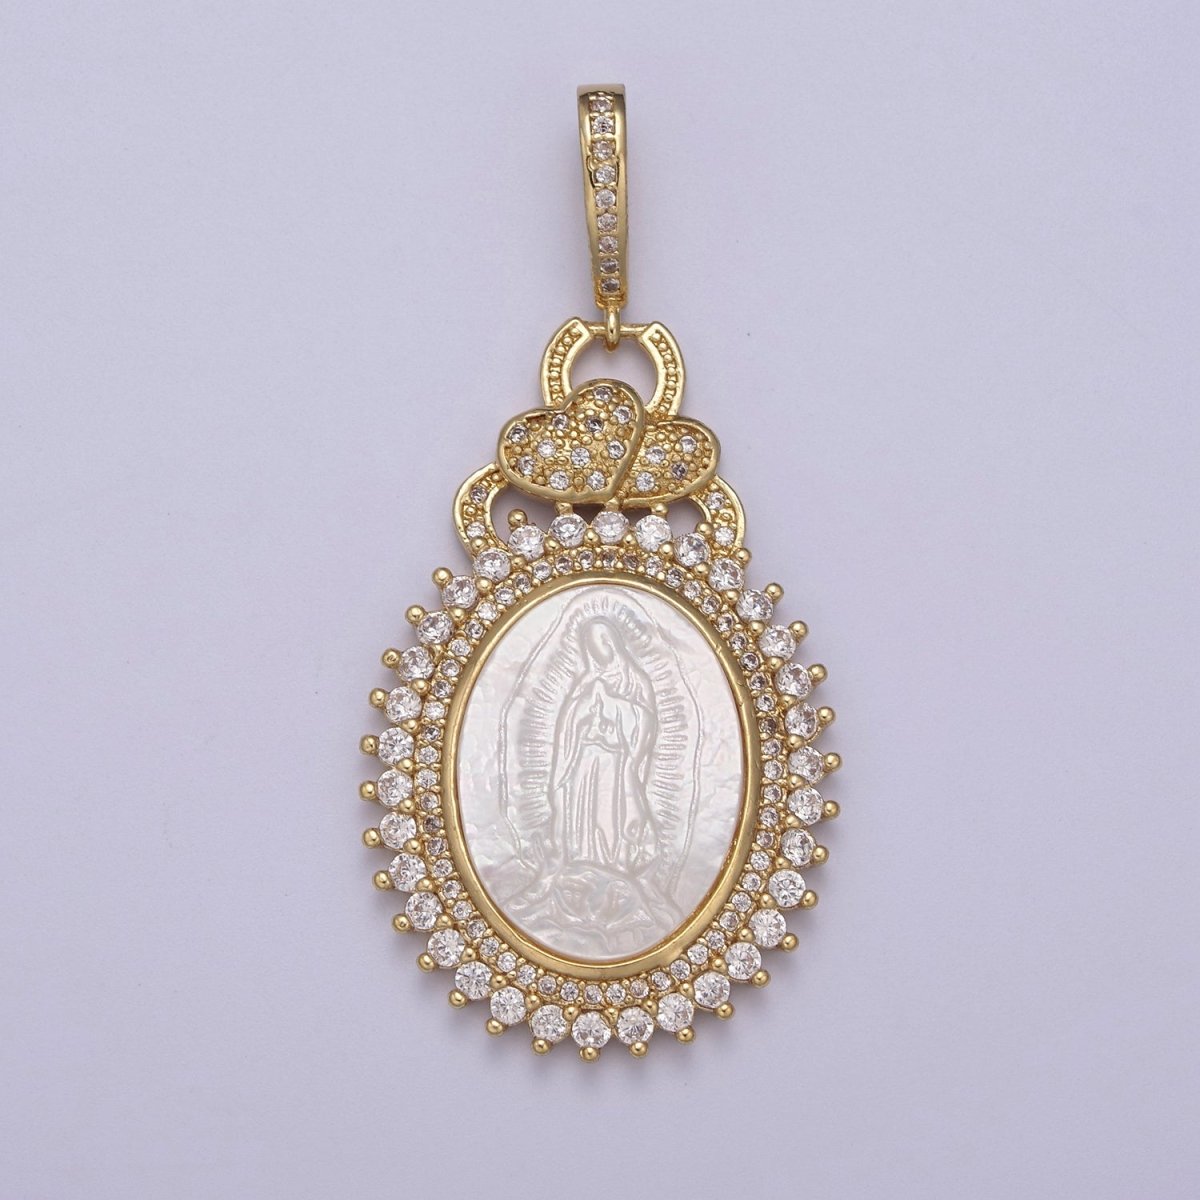 14k Gold Filled Bold Micro Pave Oval Virgin Mary Pendant with Pearl Lady Guadalupe for Statement Religious Jewelry Making H-508 - DLUXCA